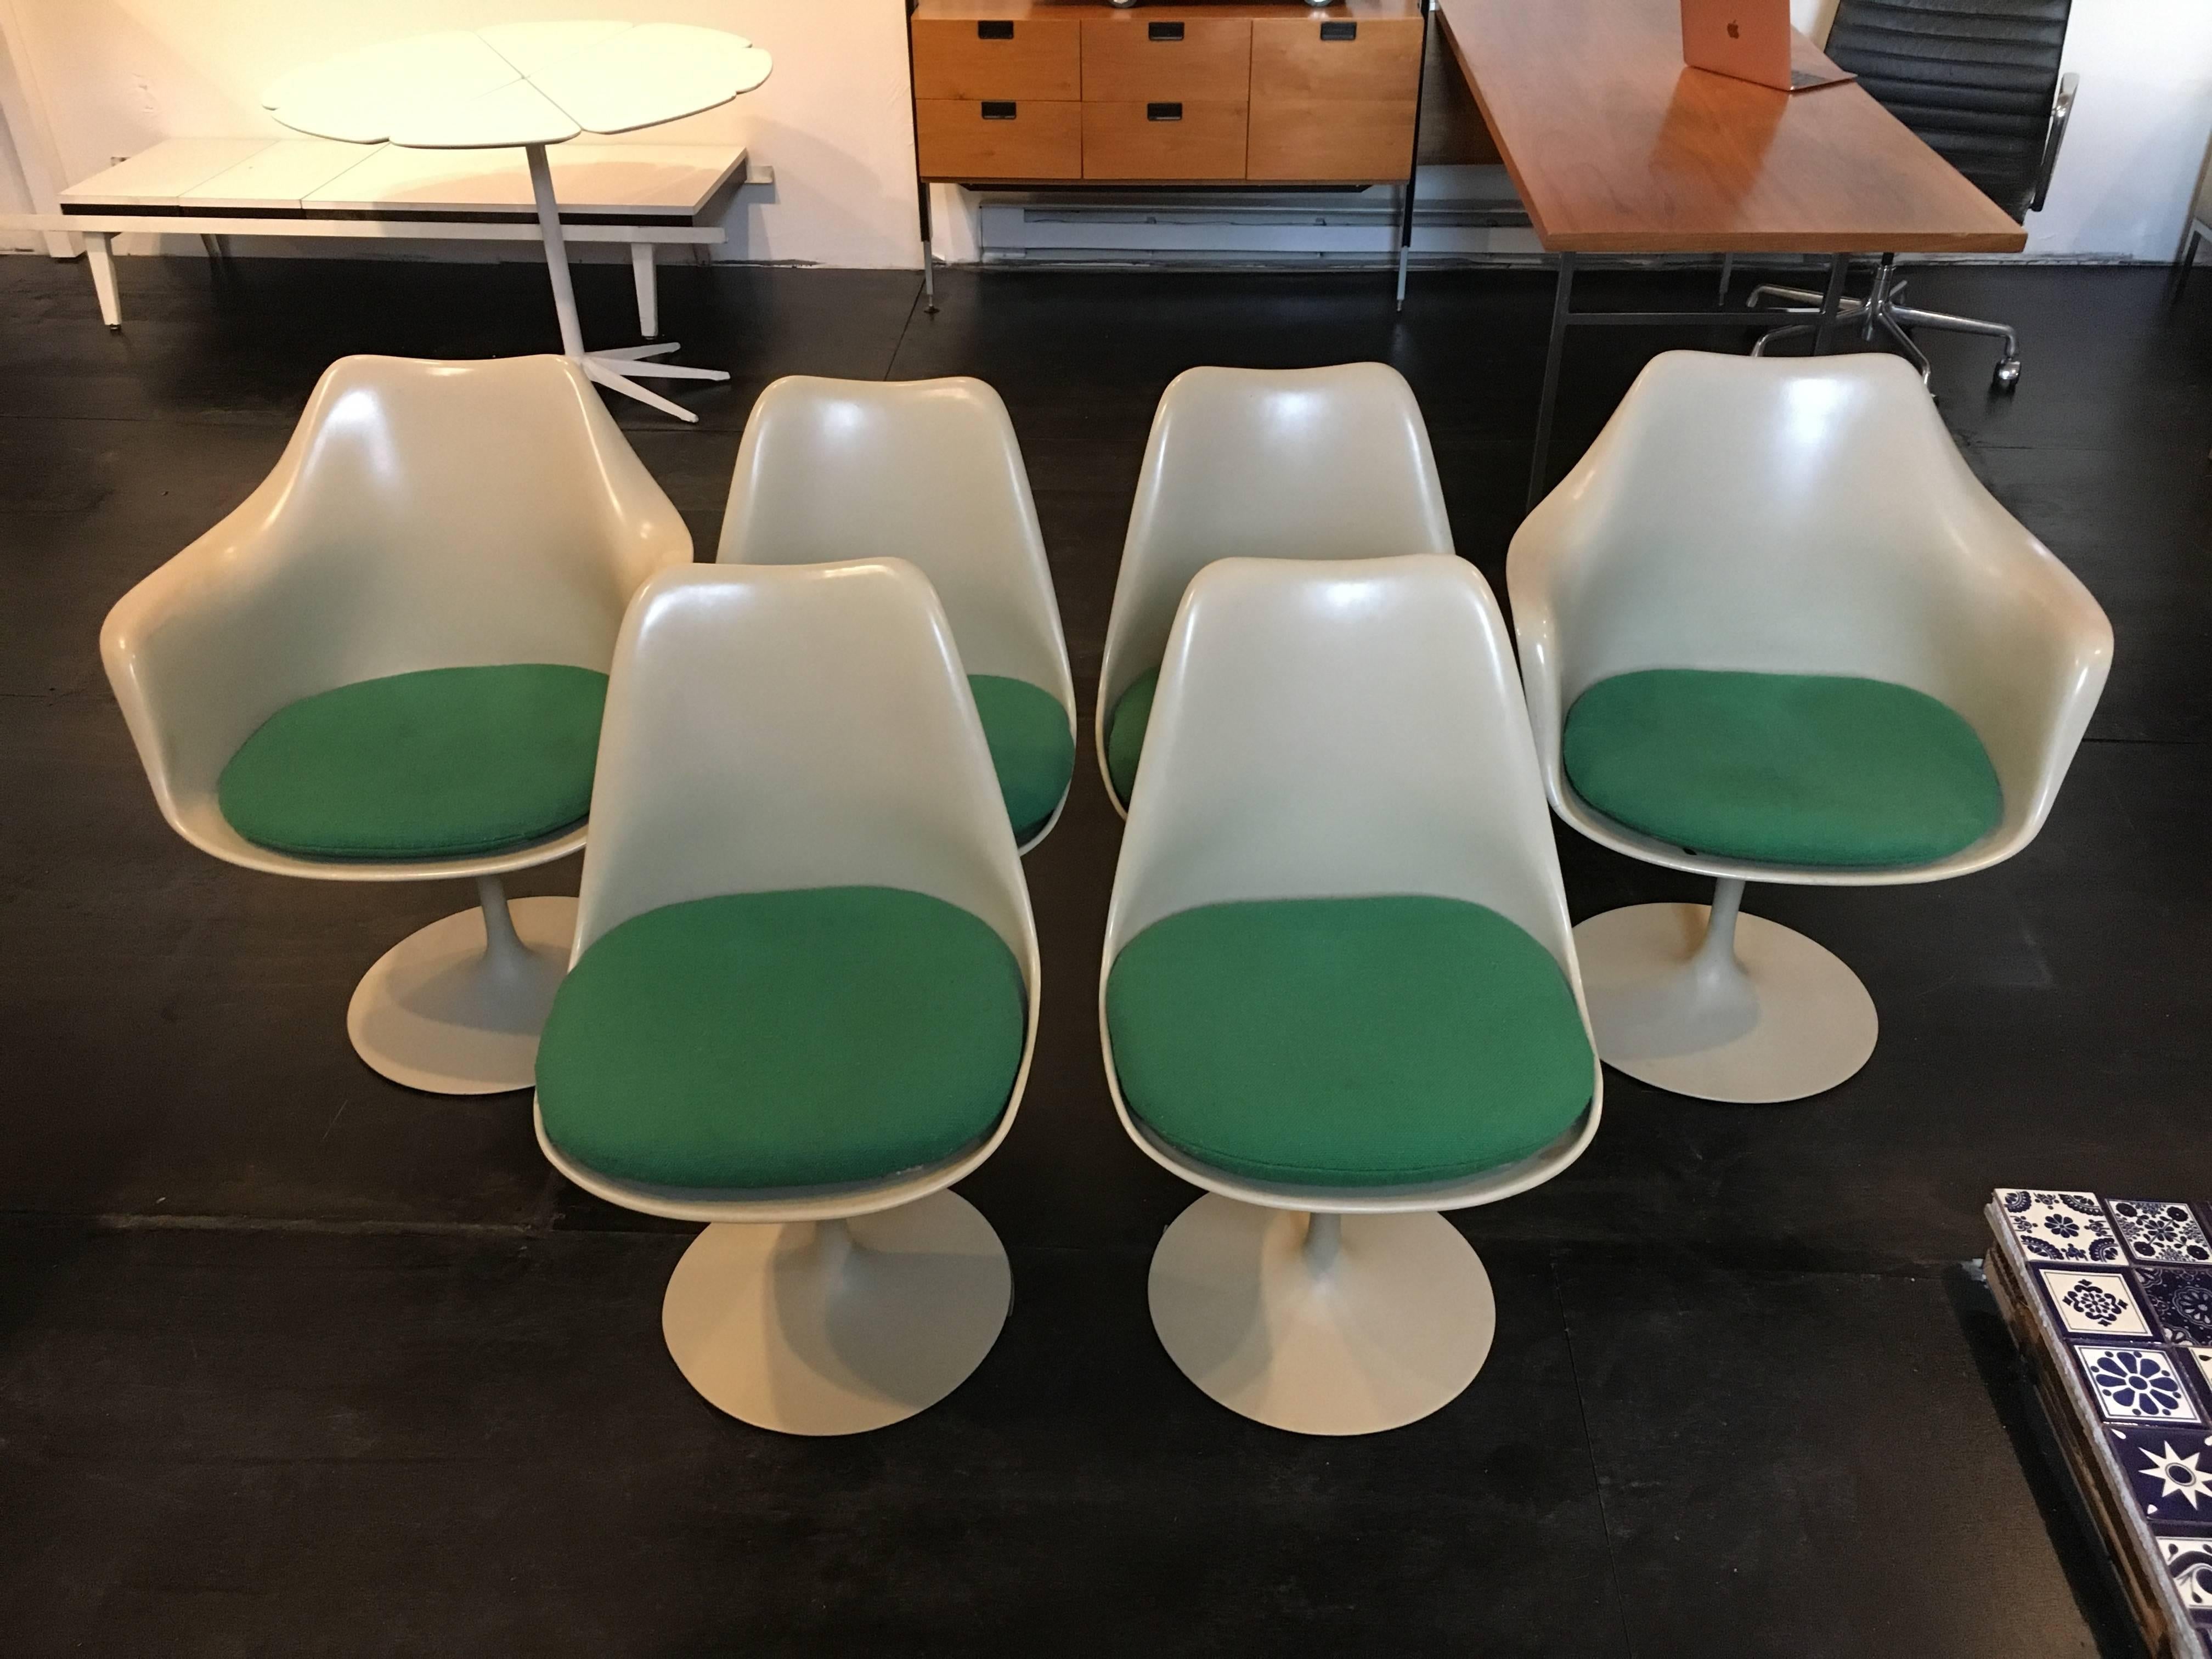 Set of six Eero Saarinen designed tulip chairs manufactured by Knoll. Set includes two armchairs and four side chairs. All chairs have swivel bases and original Knoll cushions.